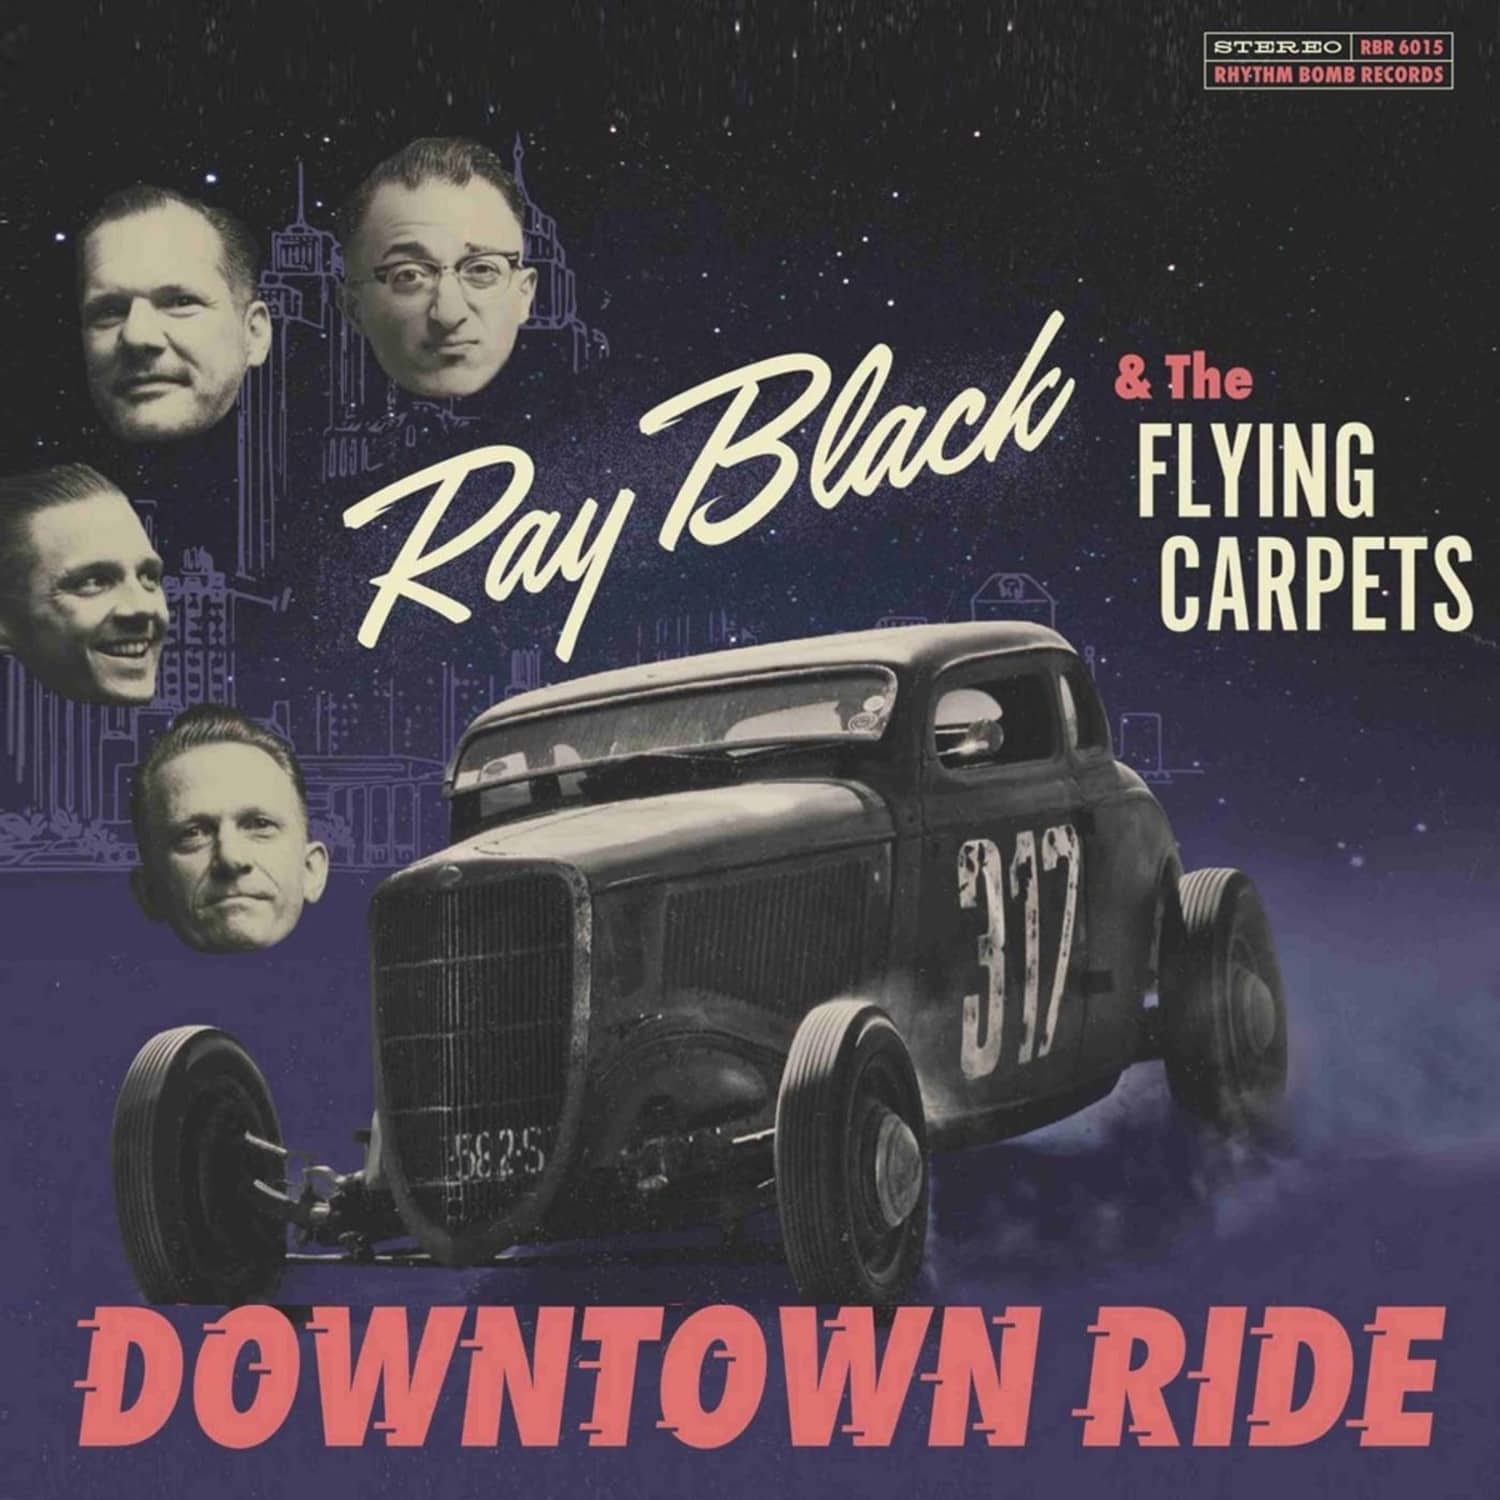  Ray Black & The Flying Carpets - DOWNTOWN RIDE 